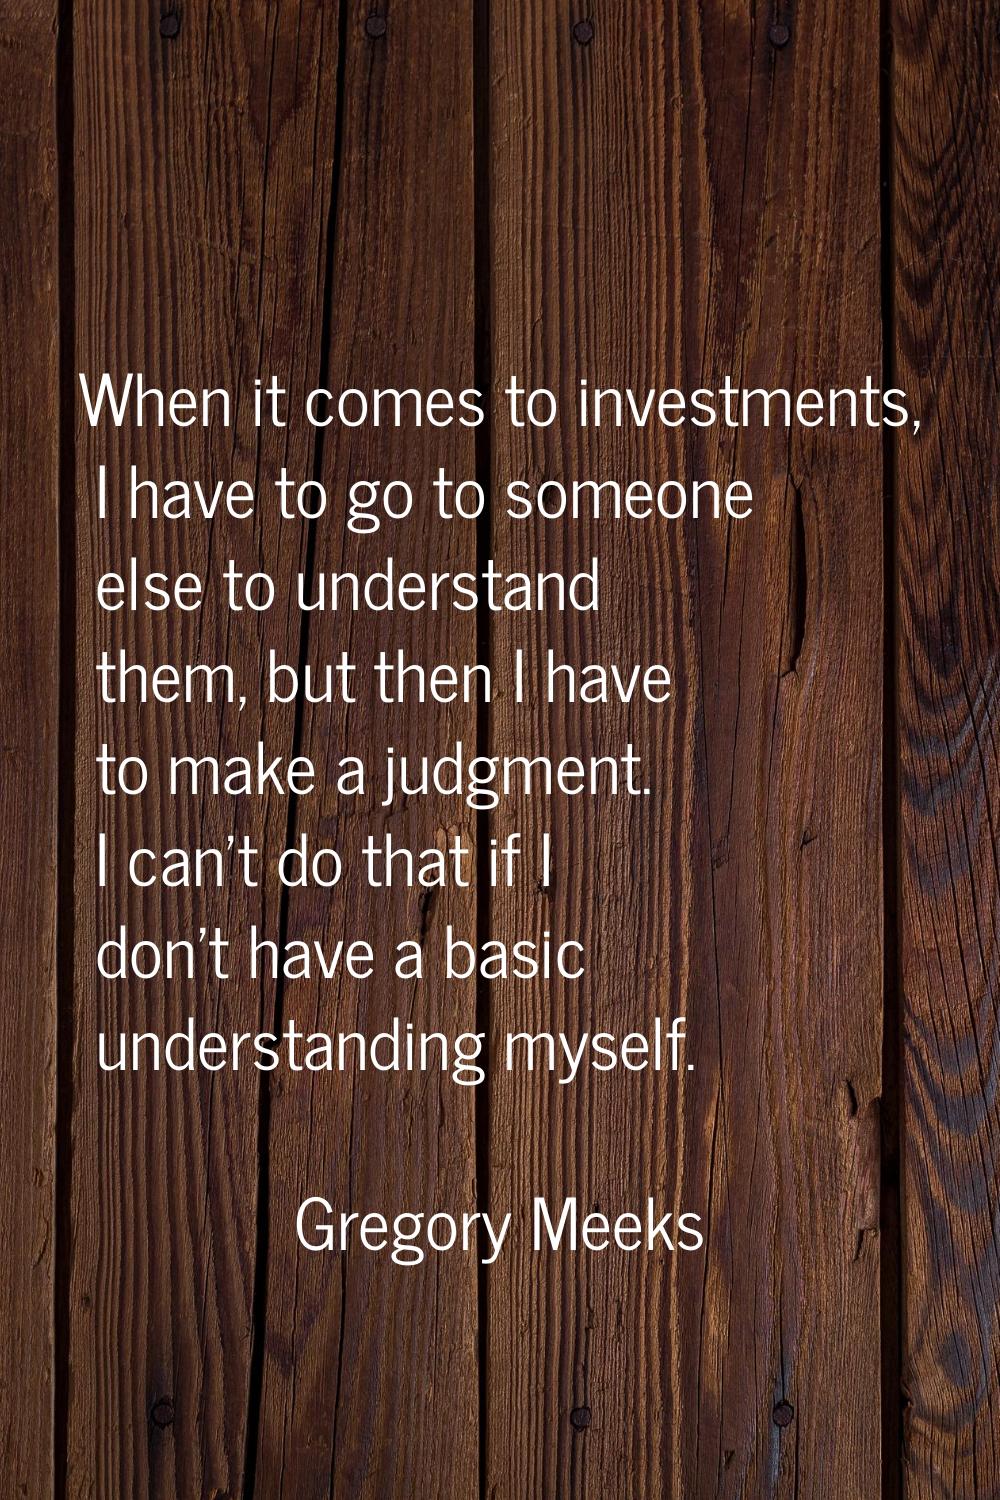 When it comes to investments, I have to go to someone else to understand them, but then I have to m